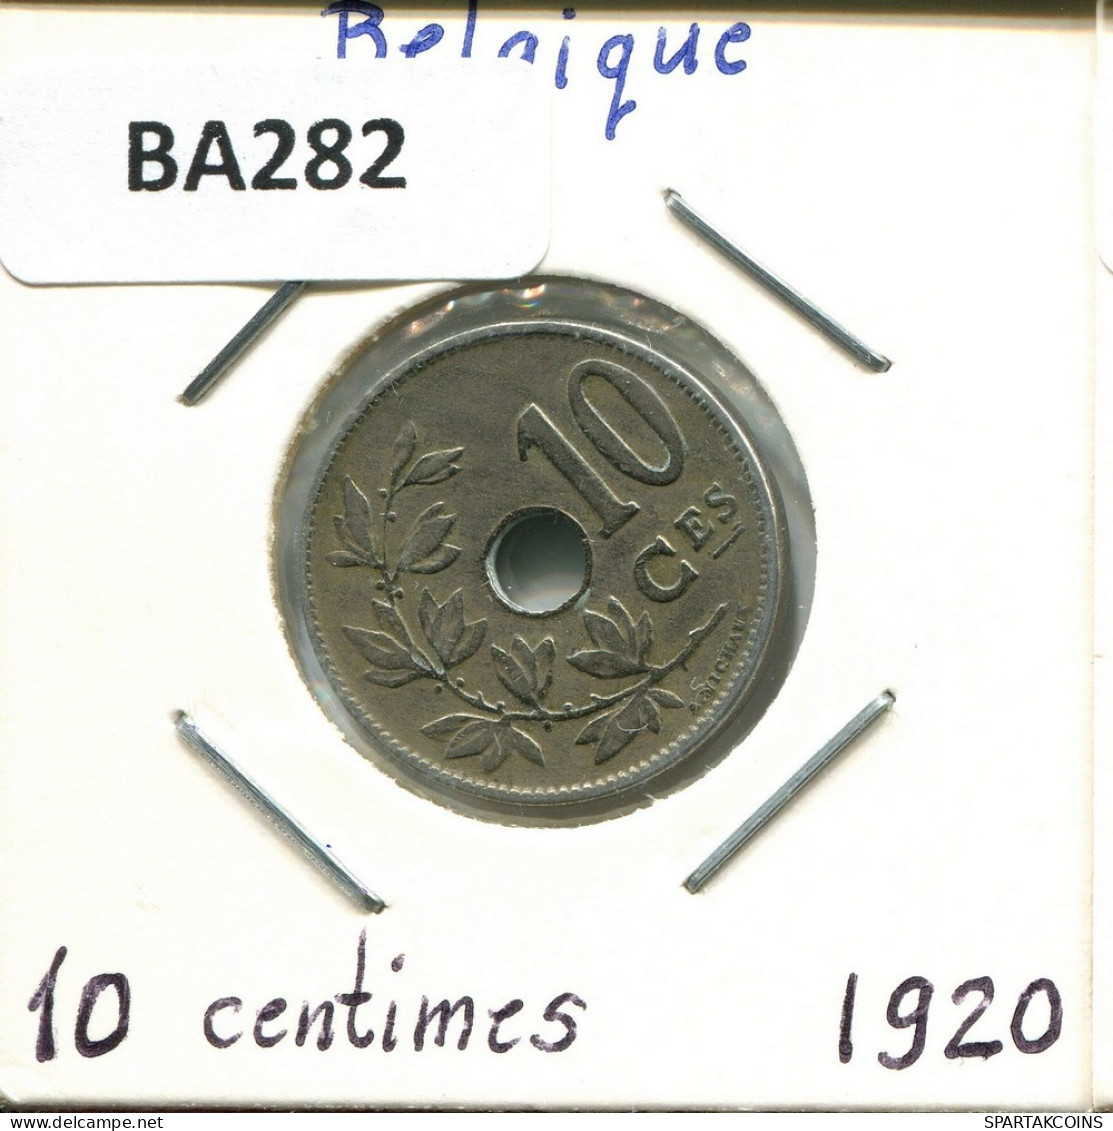 10 CENTIMES 1920 FRENCH Text BELGIUM Coin #BA282.U.A - 10 Cents